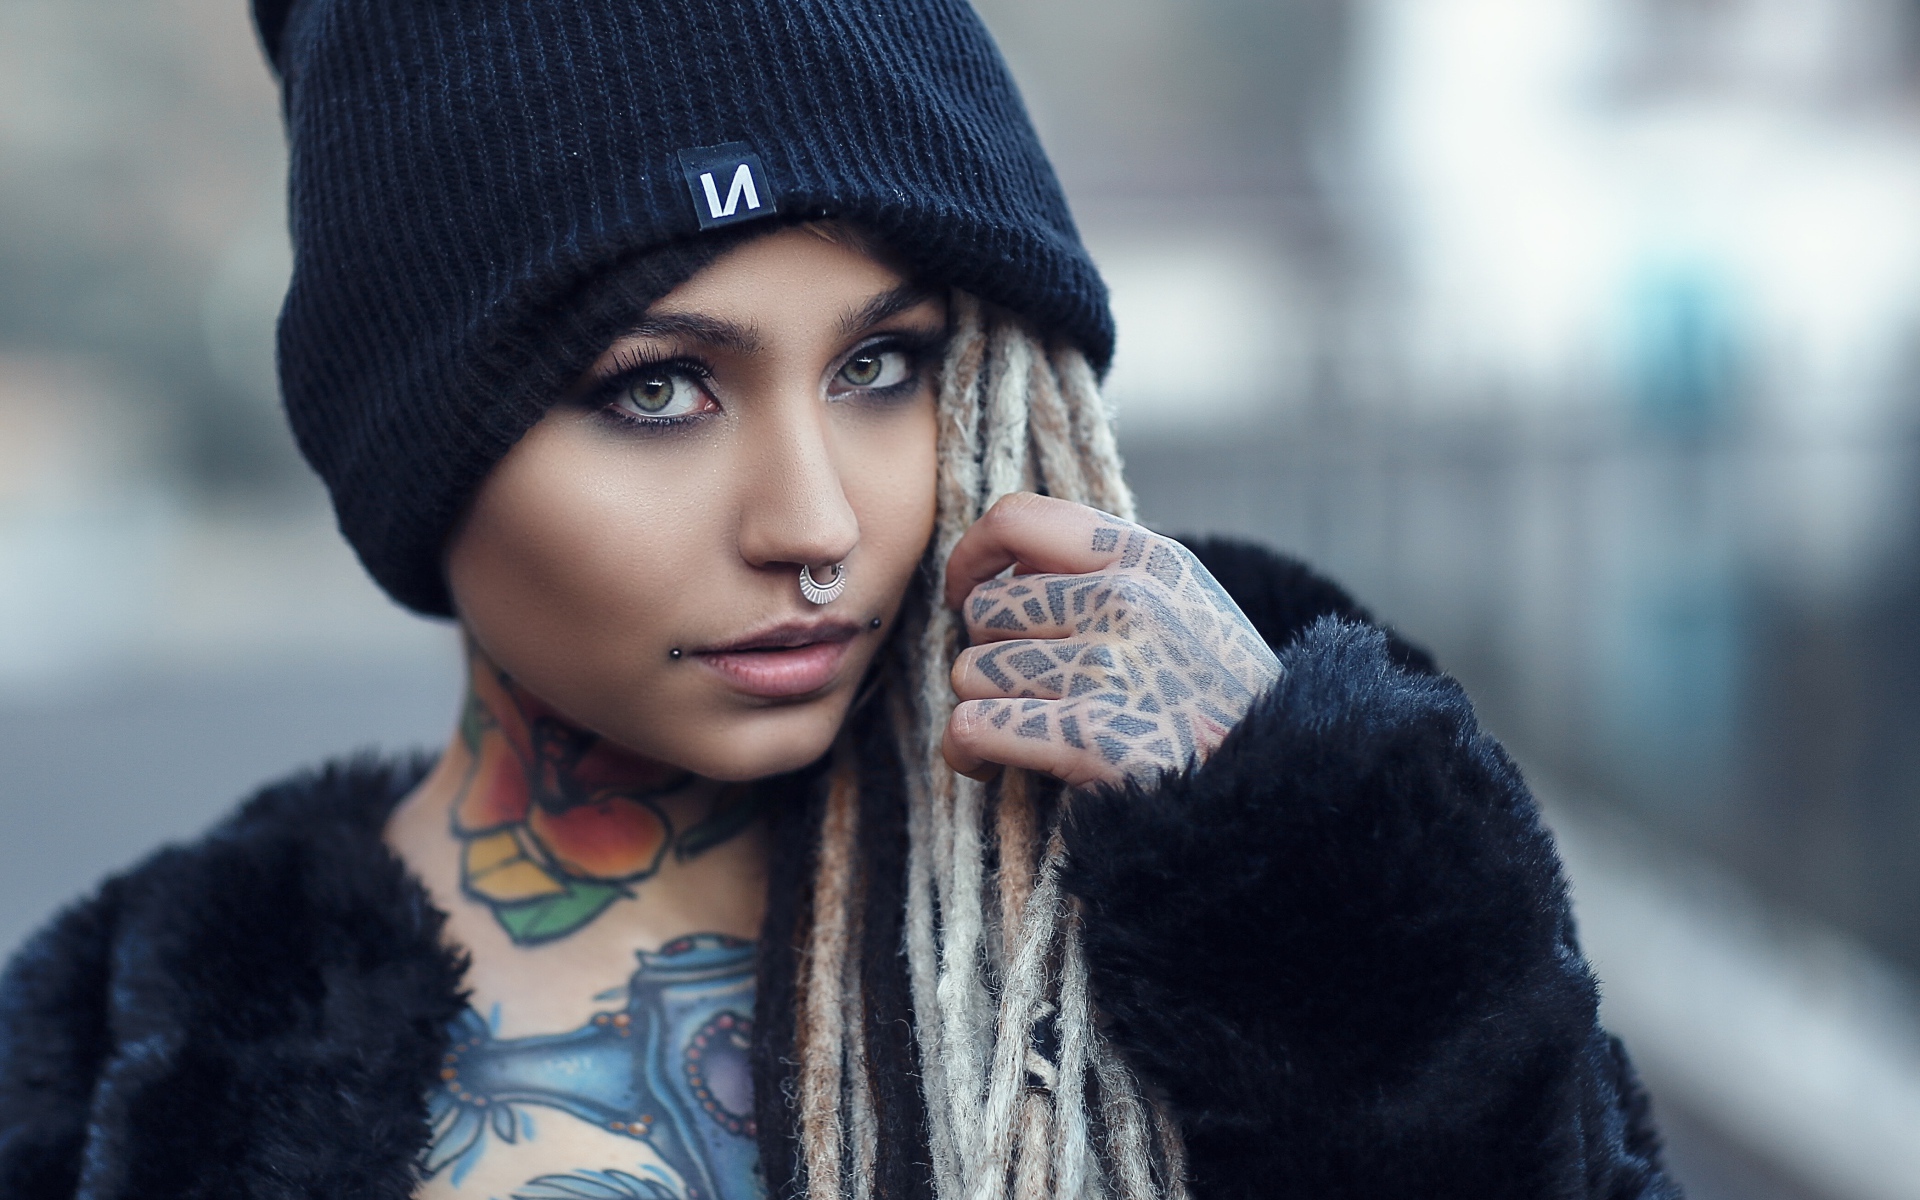 Beautiful girl in a black hat with tattoos on her body